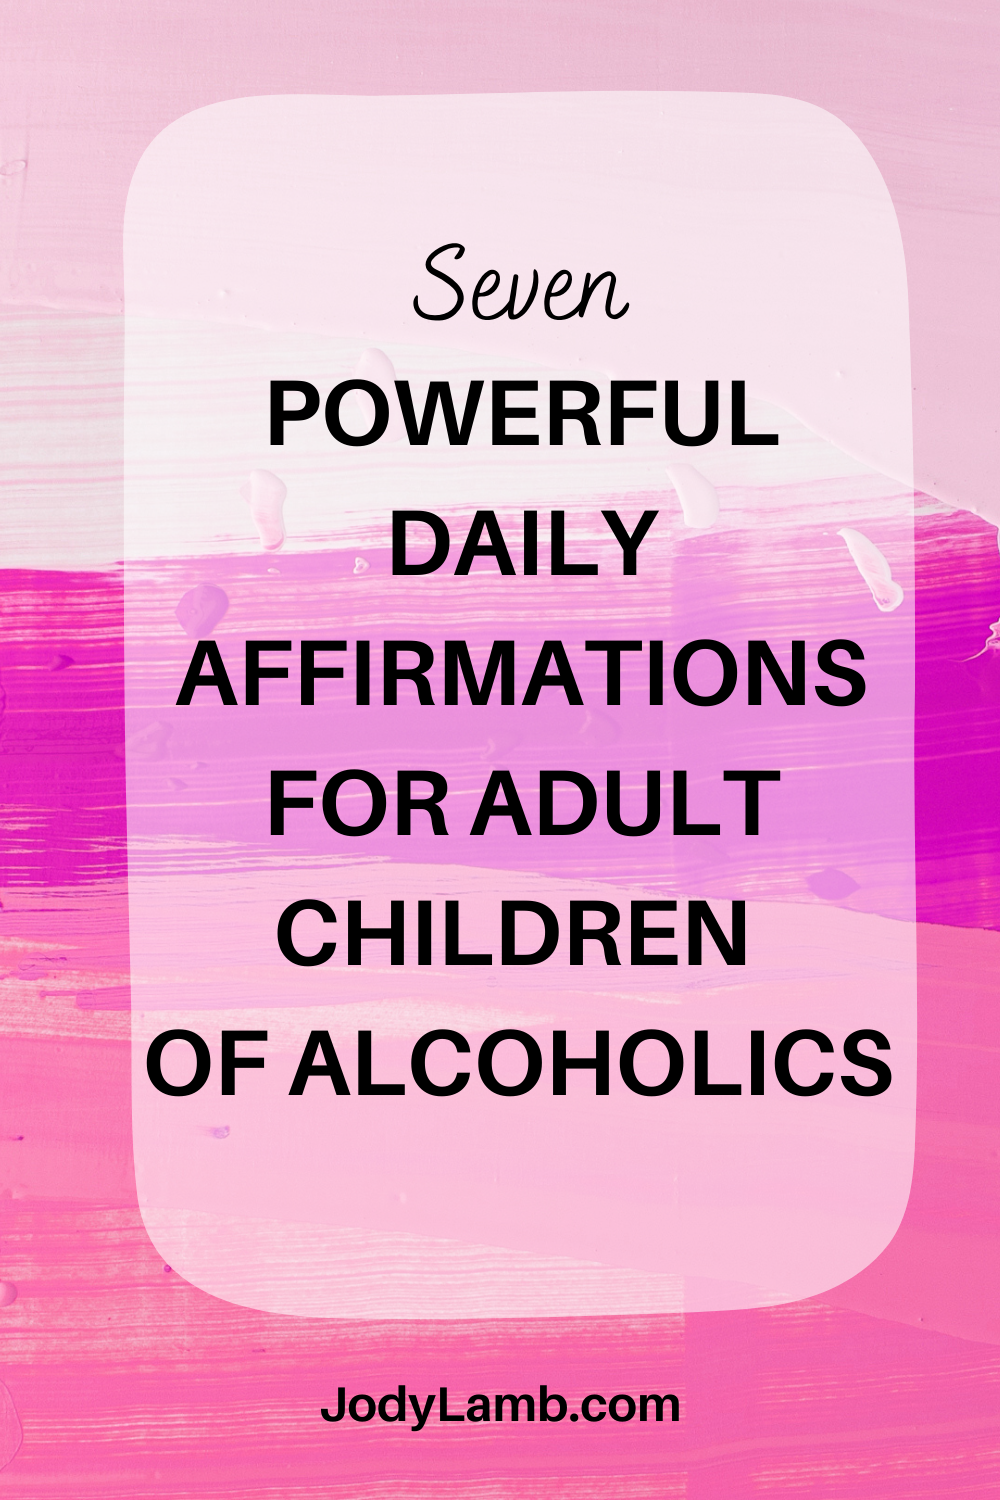 HOW TO HEAL FROM GROWING UP AN ALCOHOLIC PARENT in 2023  Children of  alcoholics, Alcoholic parents, Adult children